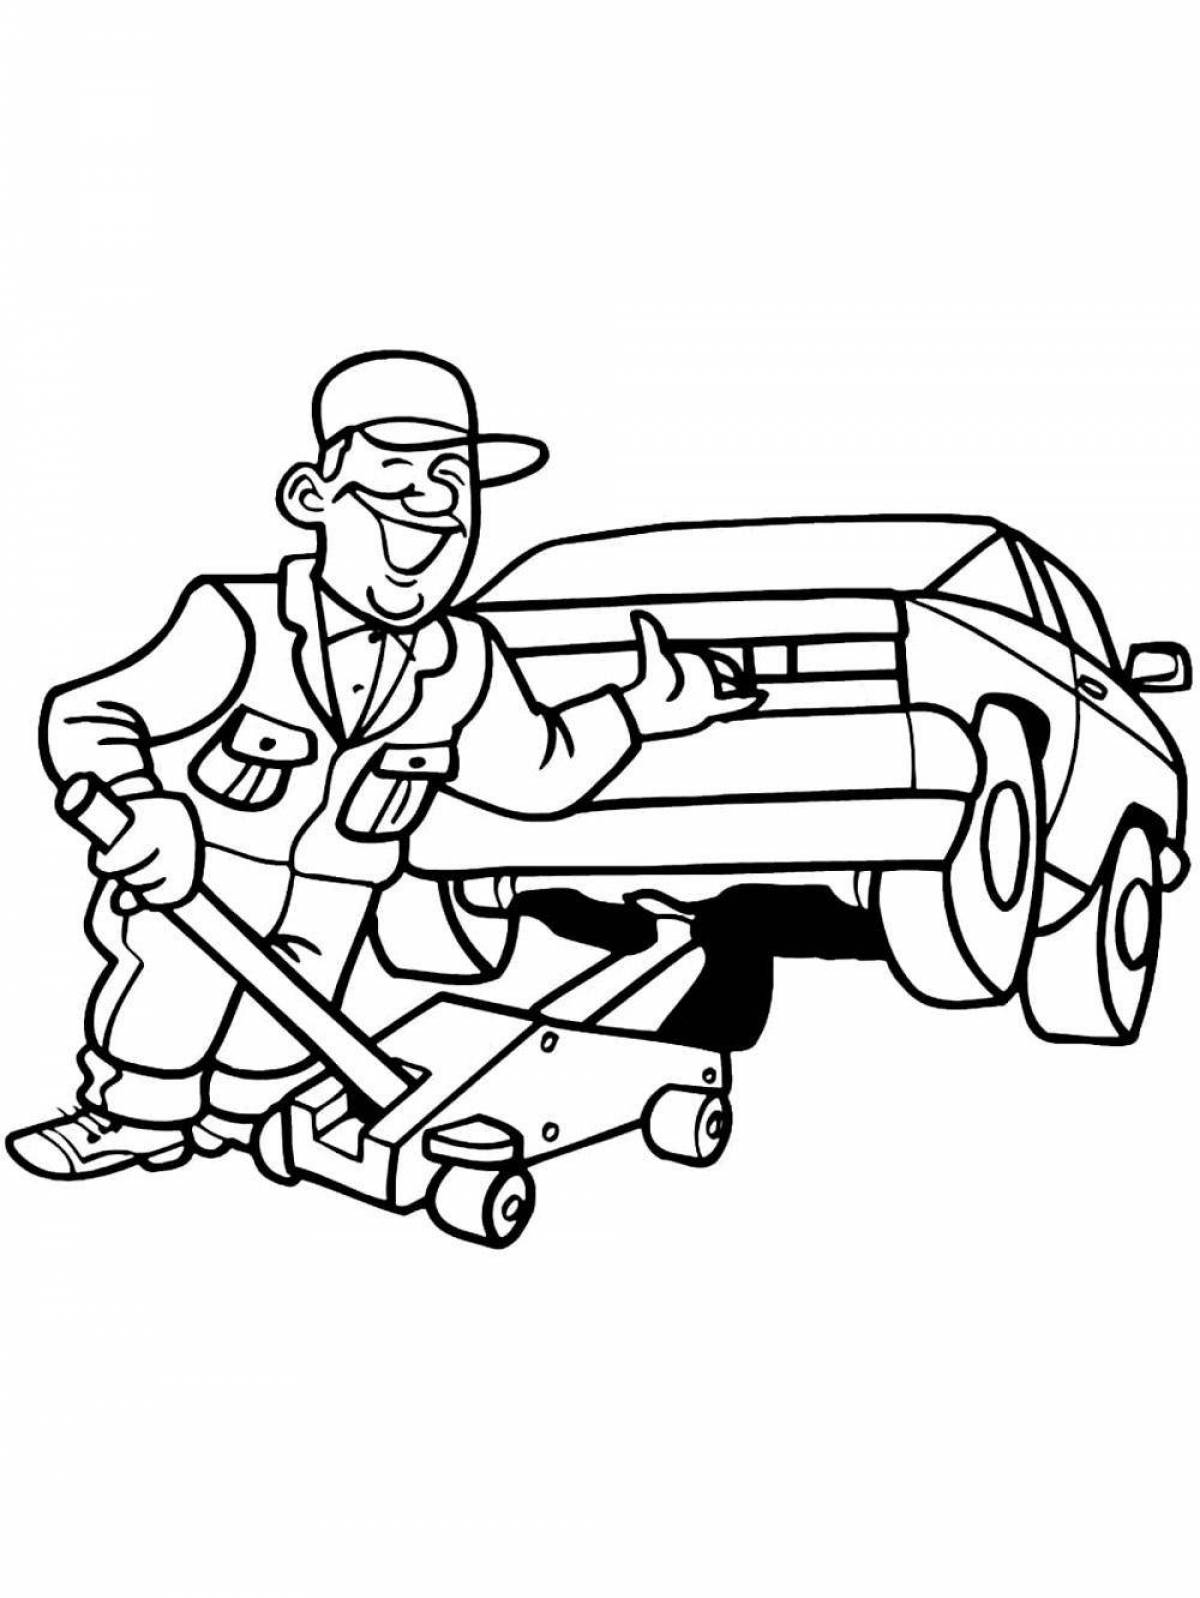 Coloring book outstanding auto mechanic